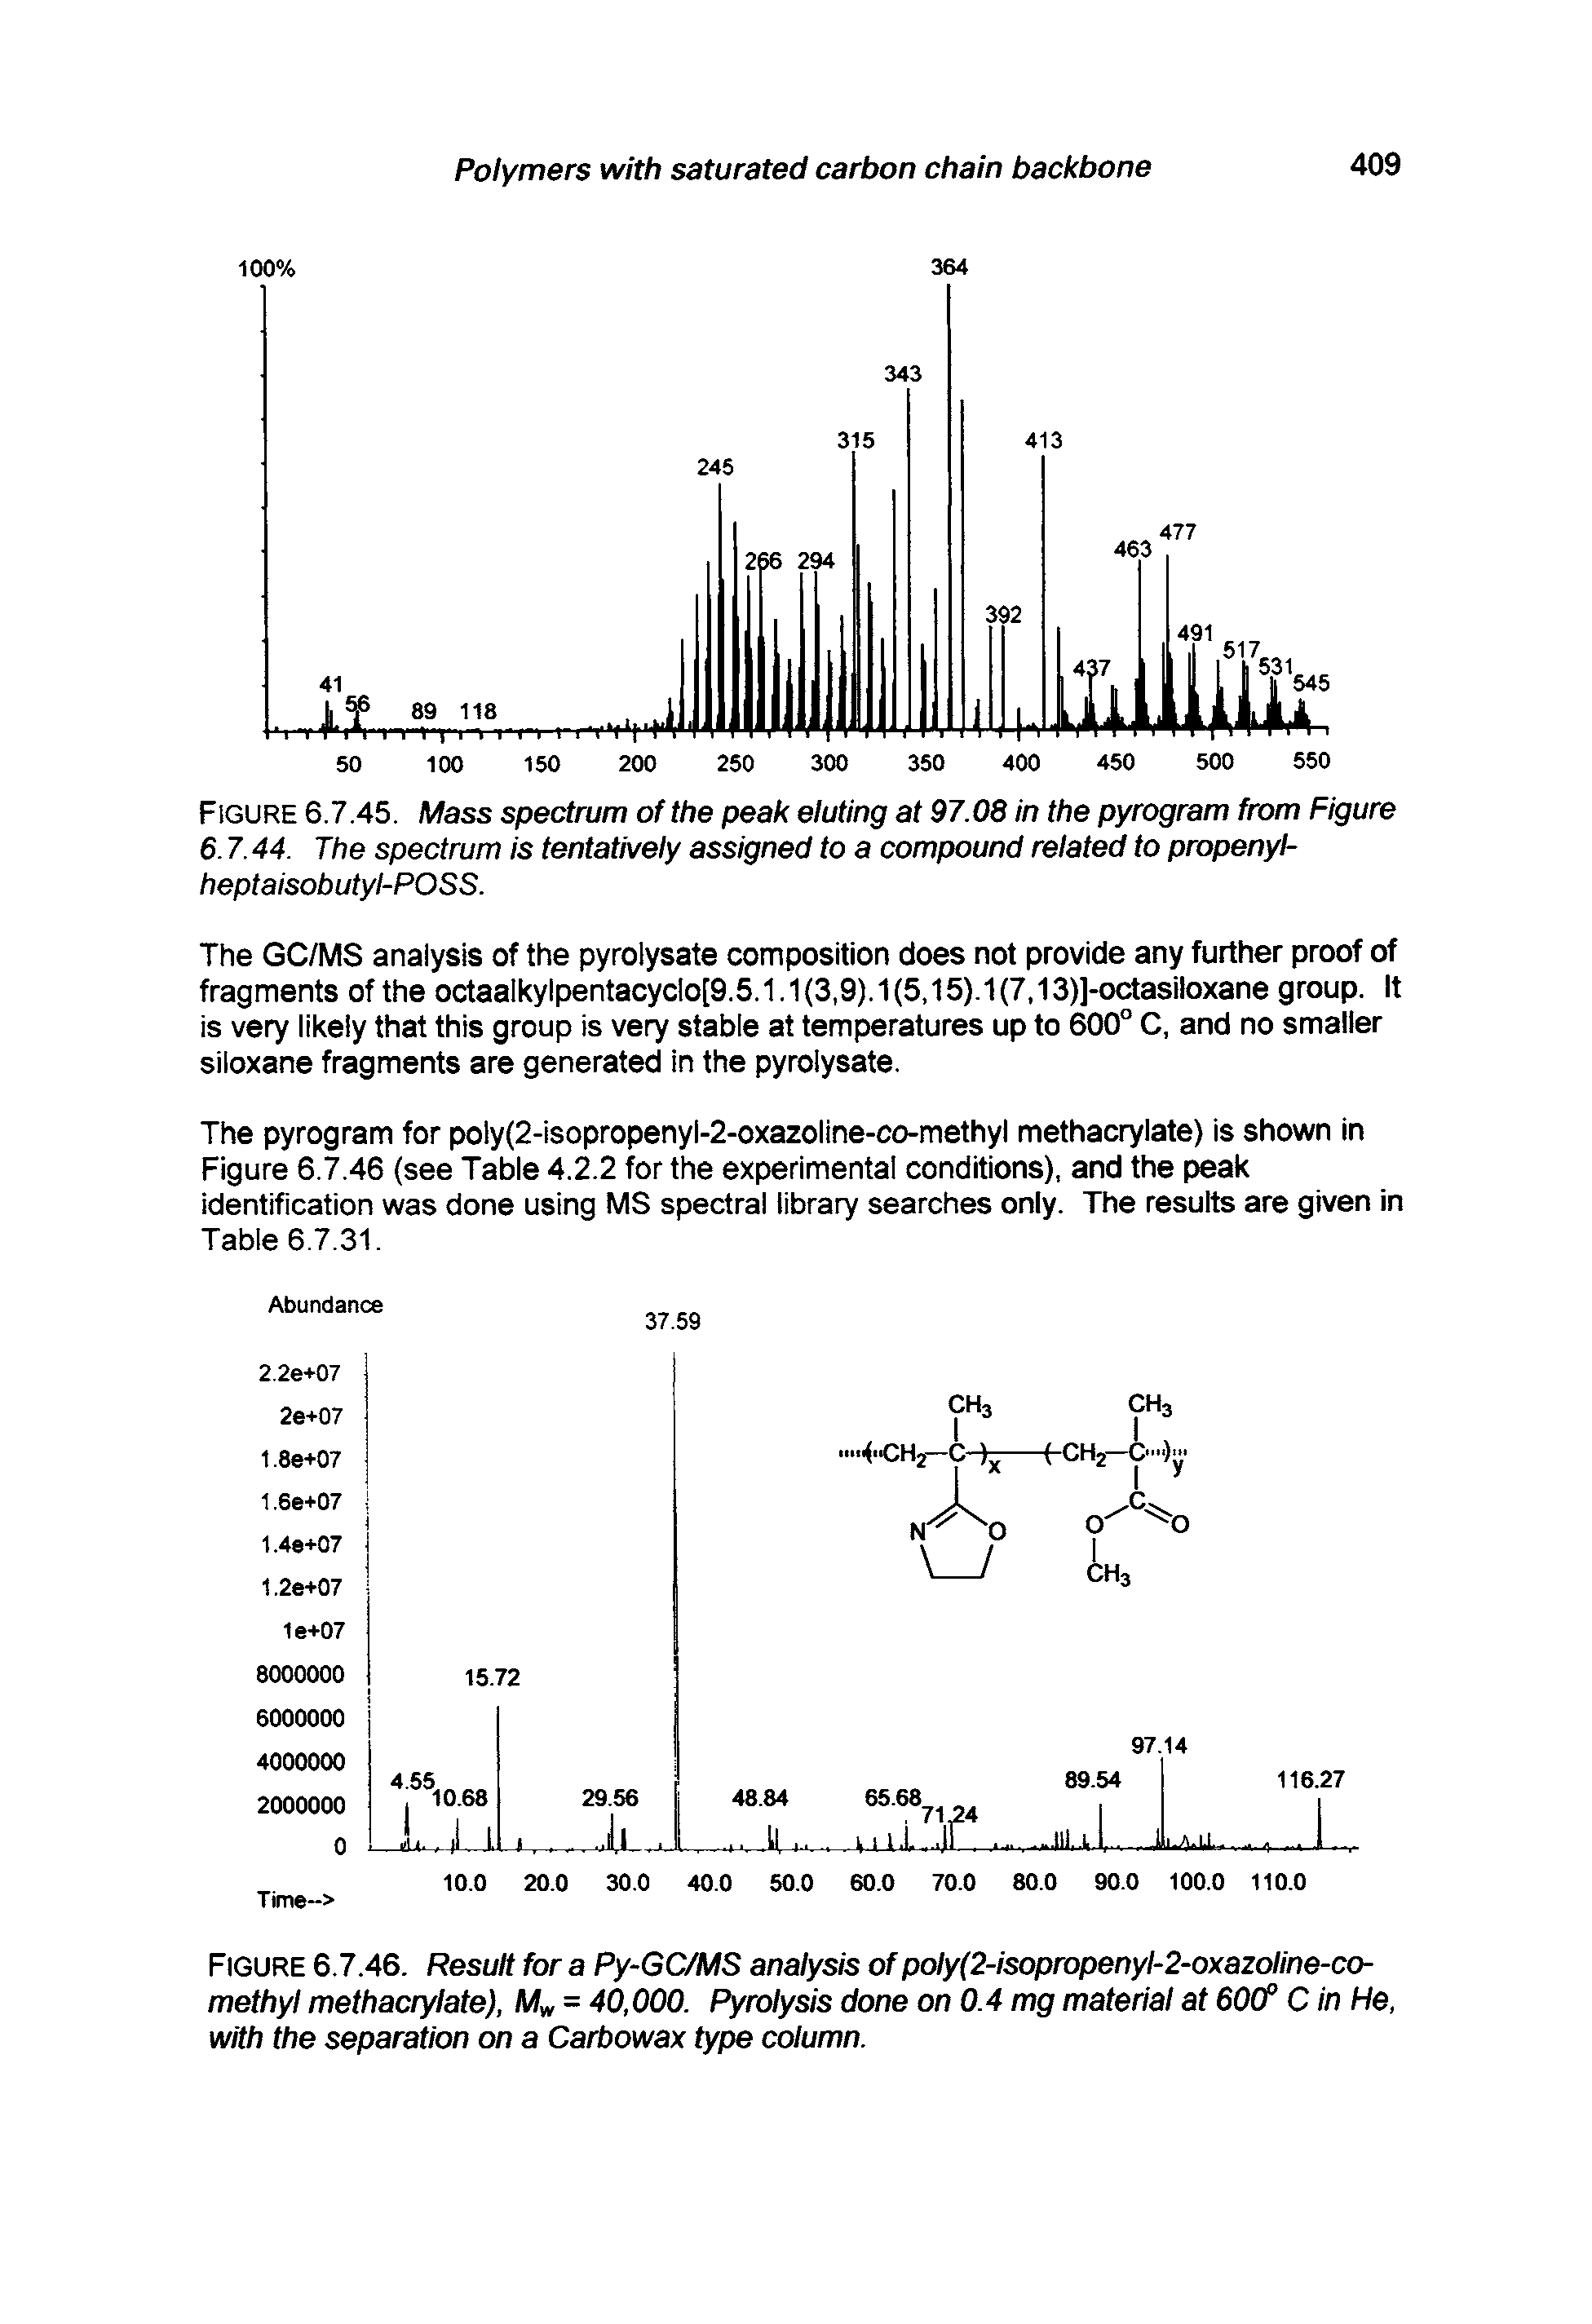 Figure 6.7.46. Result for a Py-GC/MS analysis ofpoly(2-isopropenyl-2-oxazoline-co-methyl methacrylate), M = 40,000. Pyrolysis done on 0.4 mg material at 60(f C in He, with the separation on a Carbowax type column.